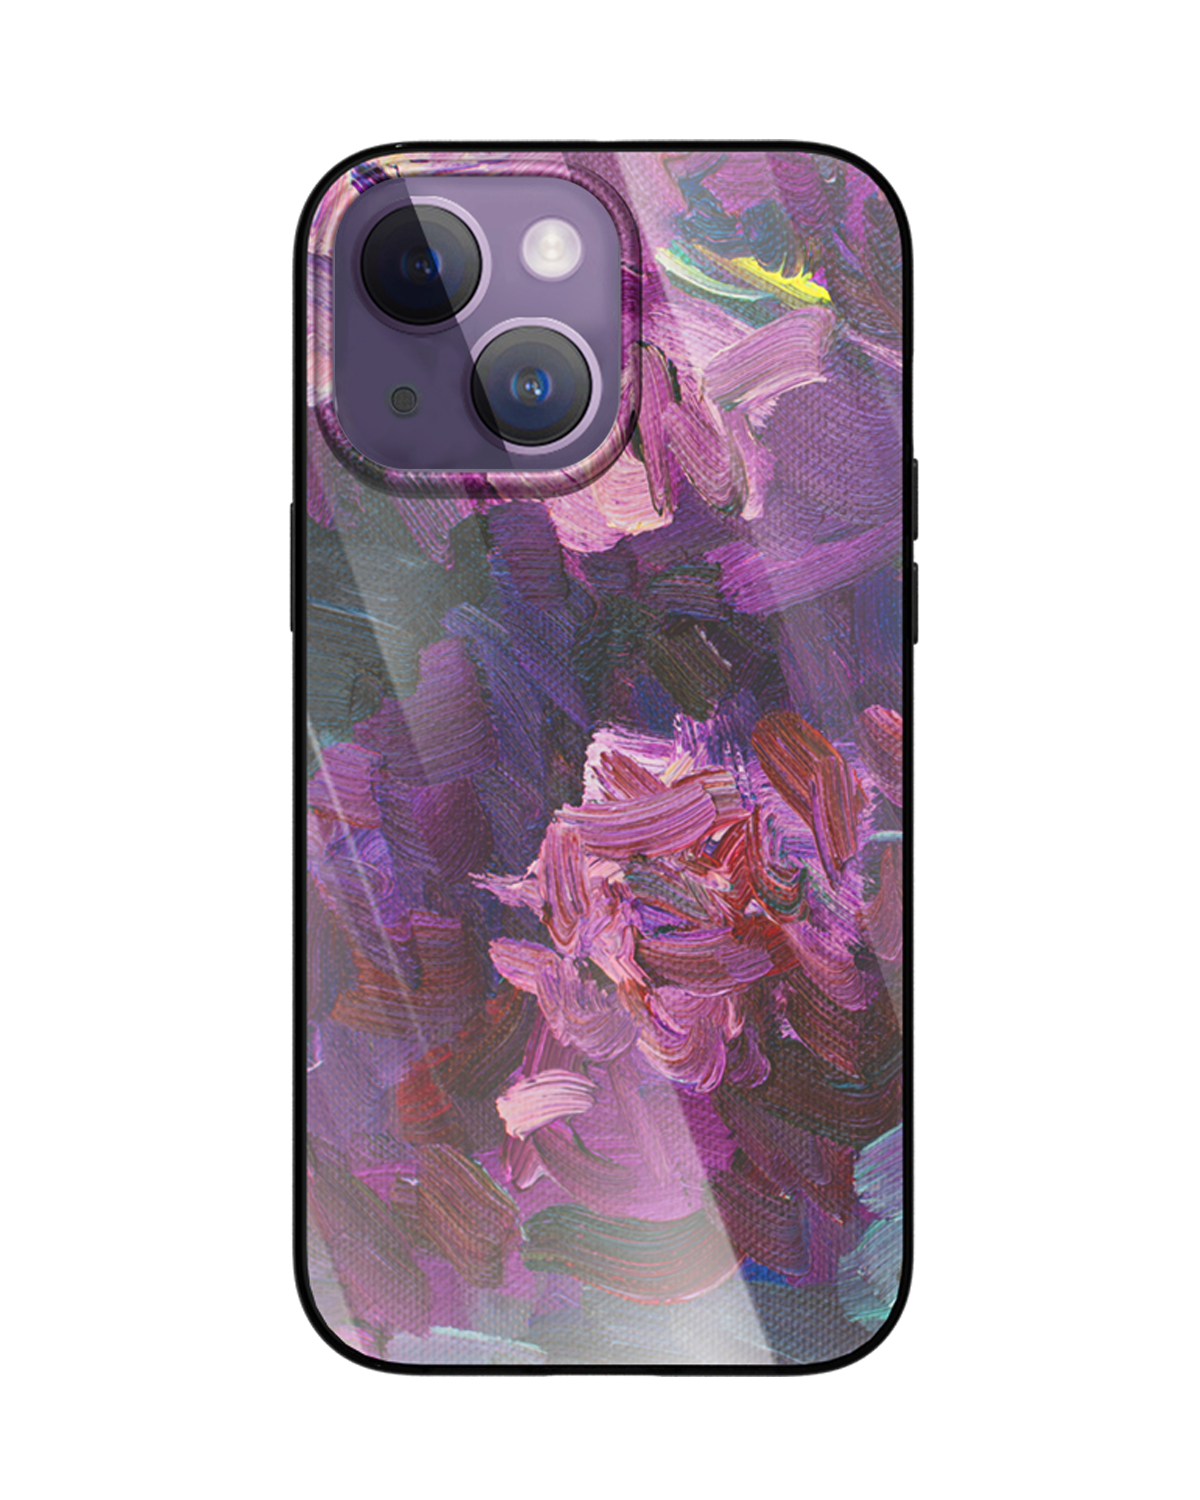 Lilac Magnetic iPhone Case